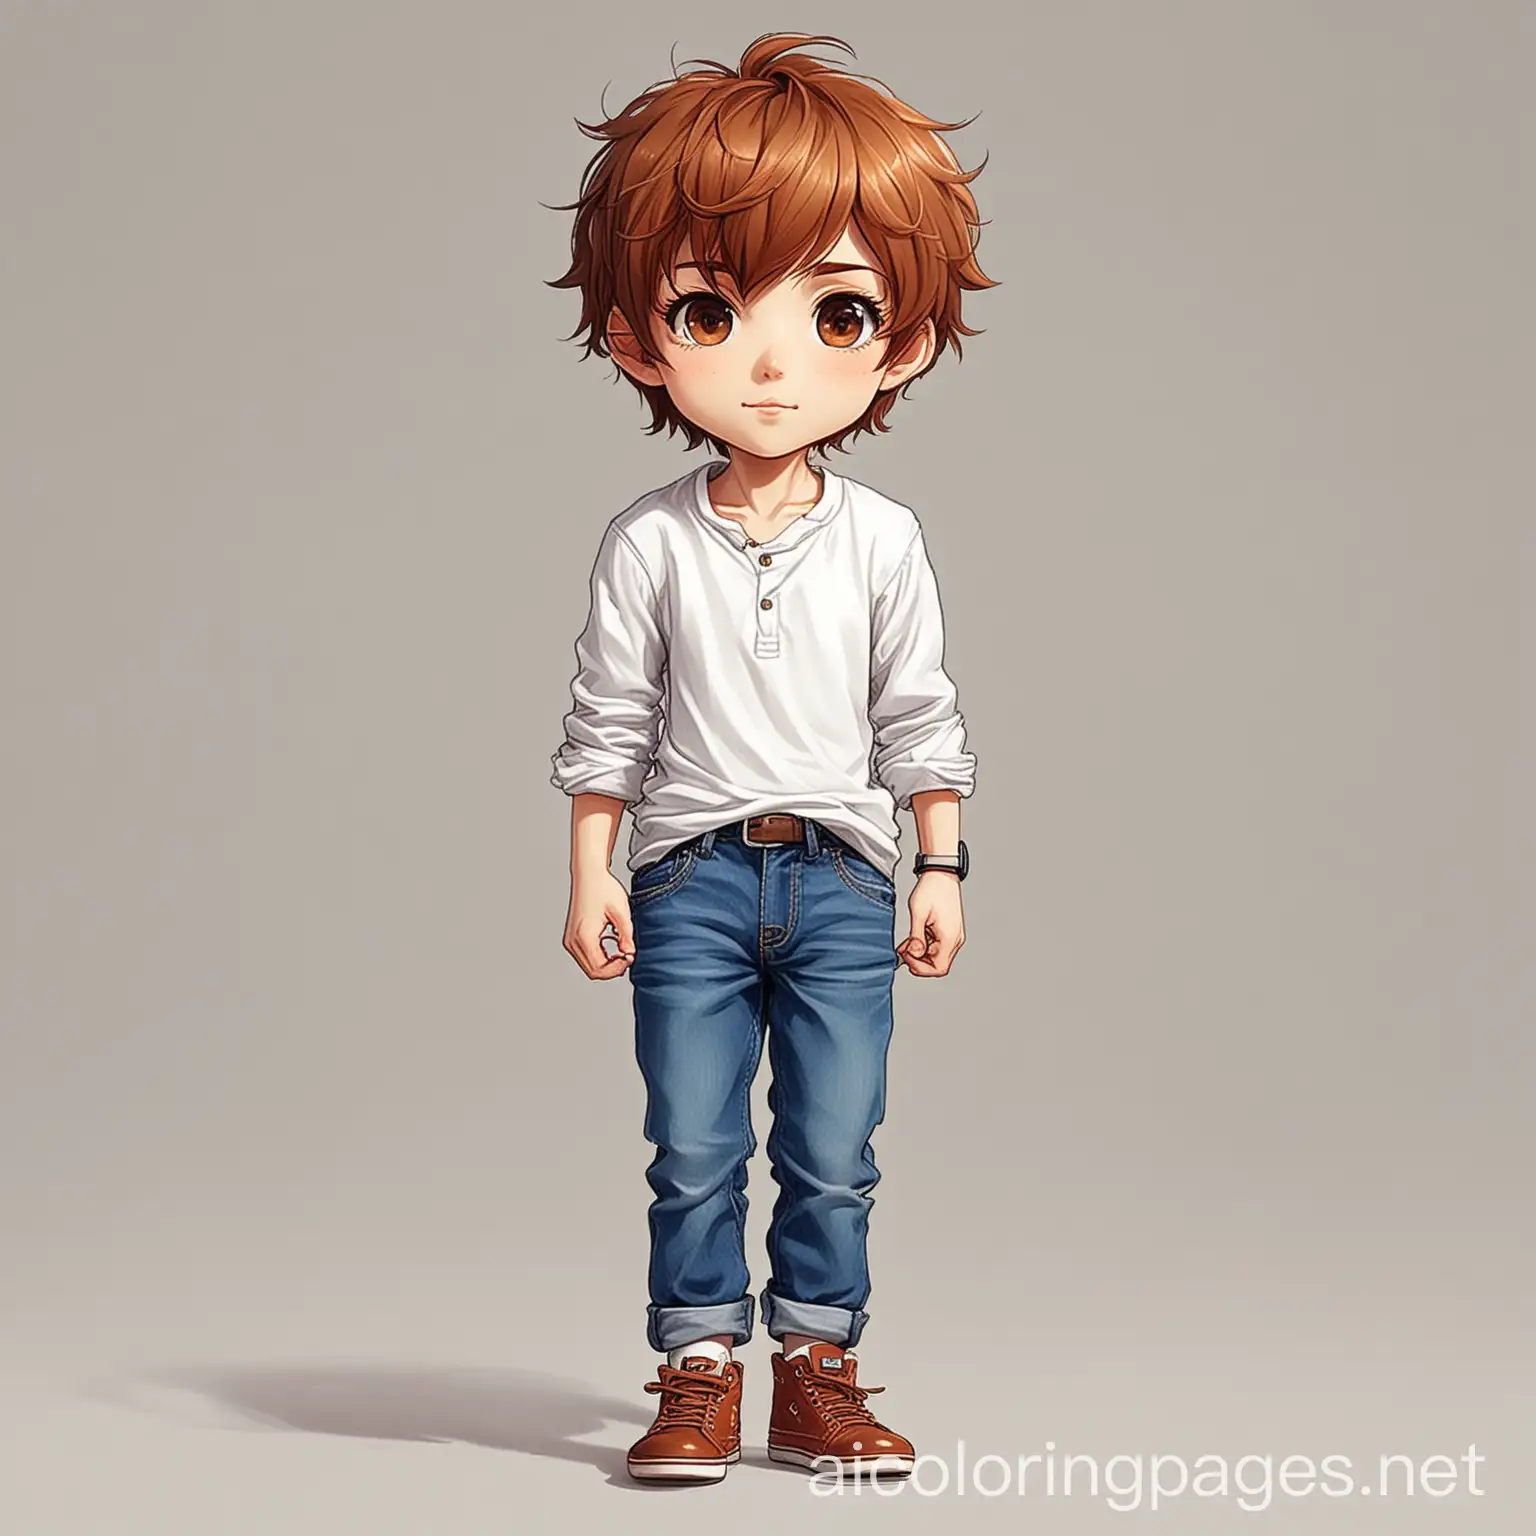 A captivating pop art rendition of a chibi anime-style British boy, exuding charm and style in his casual attire. The subject dons classic blue jeans, rolled up slightly at the ankles, and a crisp white t-shirt. His chestnut brown hair is tousled, framing his face with expressive, large hazel eyes that gleam with curiosity and determination. The simplicity of his outfit highlights his vibrant personality, making a bold statement against the plain white background. This delightful illustration encapsulates the essence of youthful energy and modern style, with the artwork's whimsical allure enhanced by the contrasting colors of his outfit., Coloring Page, black and white, line art, white background, Simplicity, Ample White Space. The background of the coloring page is plain white to make it easy for young children to color within the lines. The outlines of all the subjects are easy to distinguish, making it simple for kids to color without too much difficulty